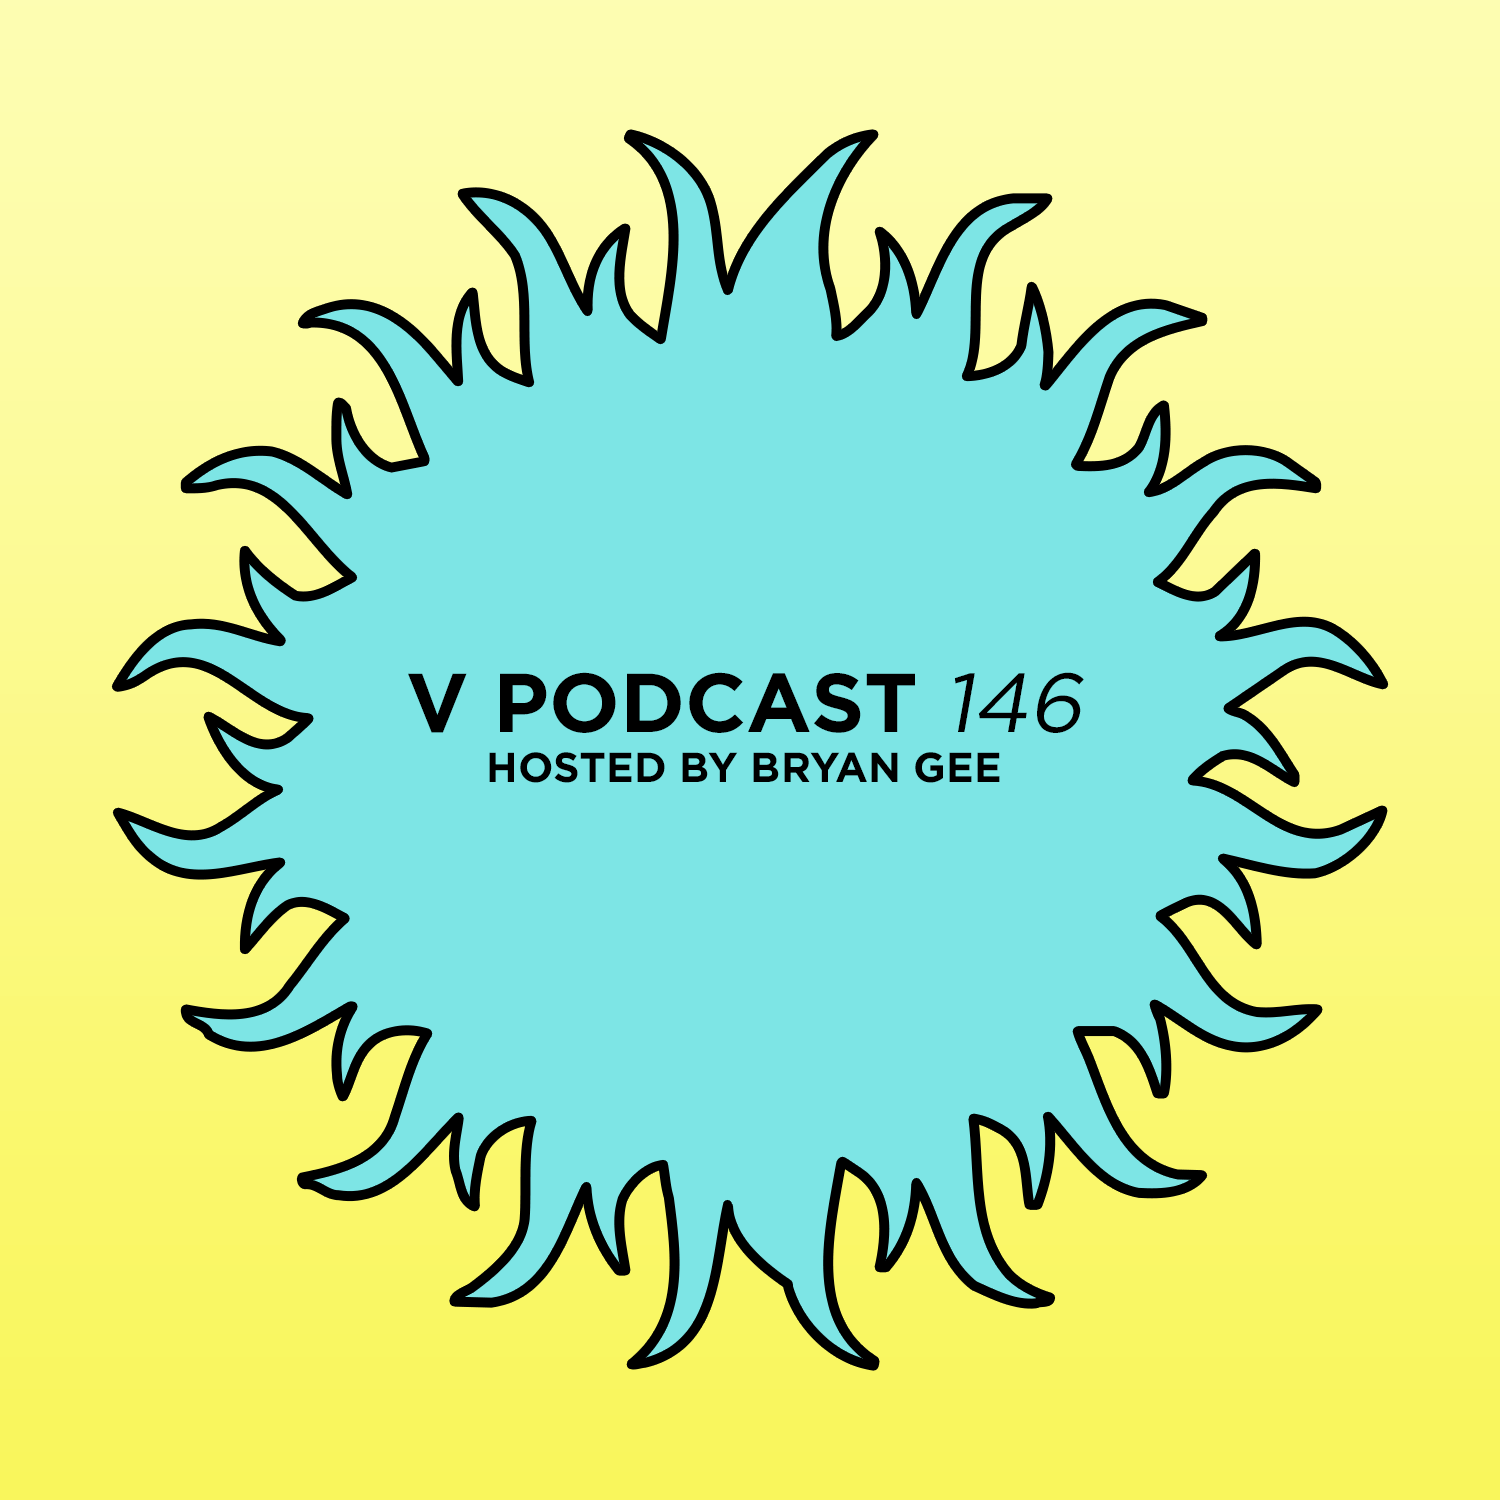 V Podcast 146 - Hosted by Bryan Gee